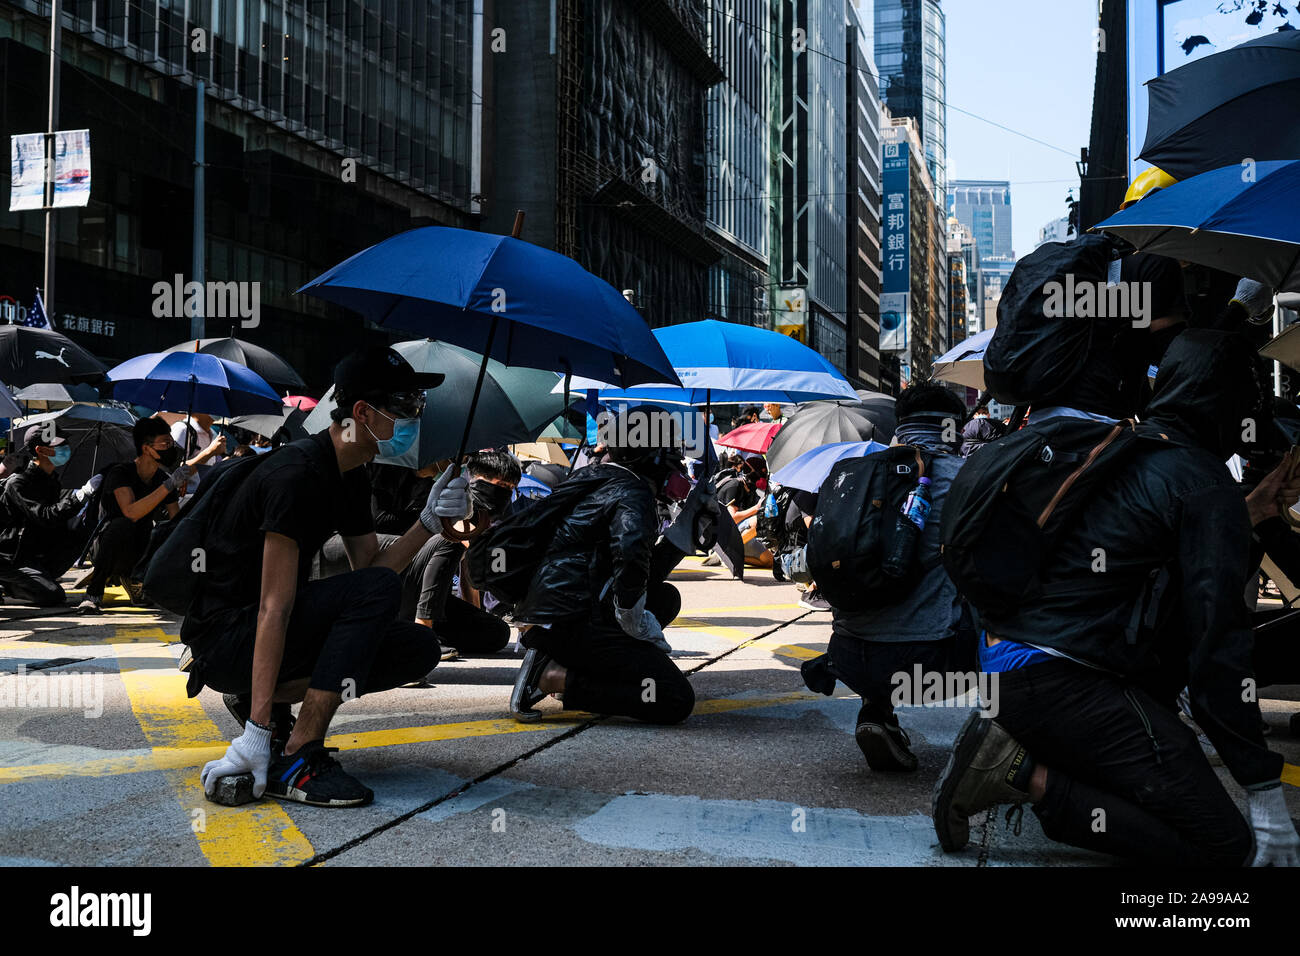 Hong Kong, China. 13th Nov, 2019. Protestors put up umbrella as a shield during a protest in the Central district Hong Kong. A 'Blossom Everywhere' action was organized by the protestors to paralyze traffic and vandalize things across Hong Kong for its third consecutive days and have sparked some of the worst violence in five months of unrest. Credit: SOPA Images Limited/Alamy Live News Stock Photo